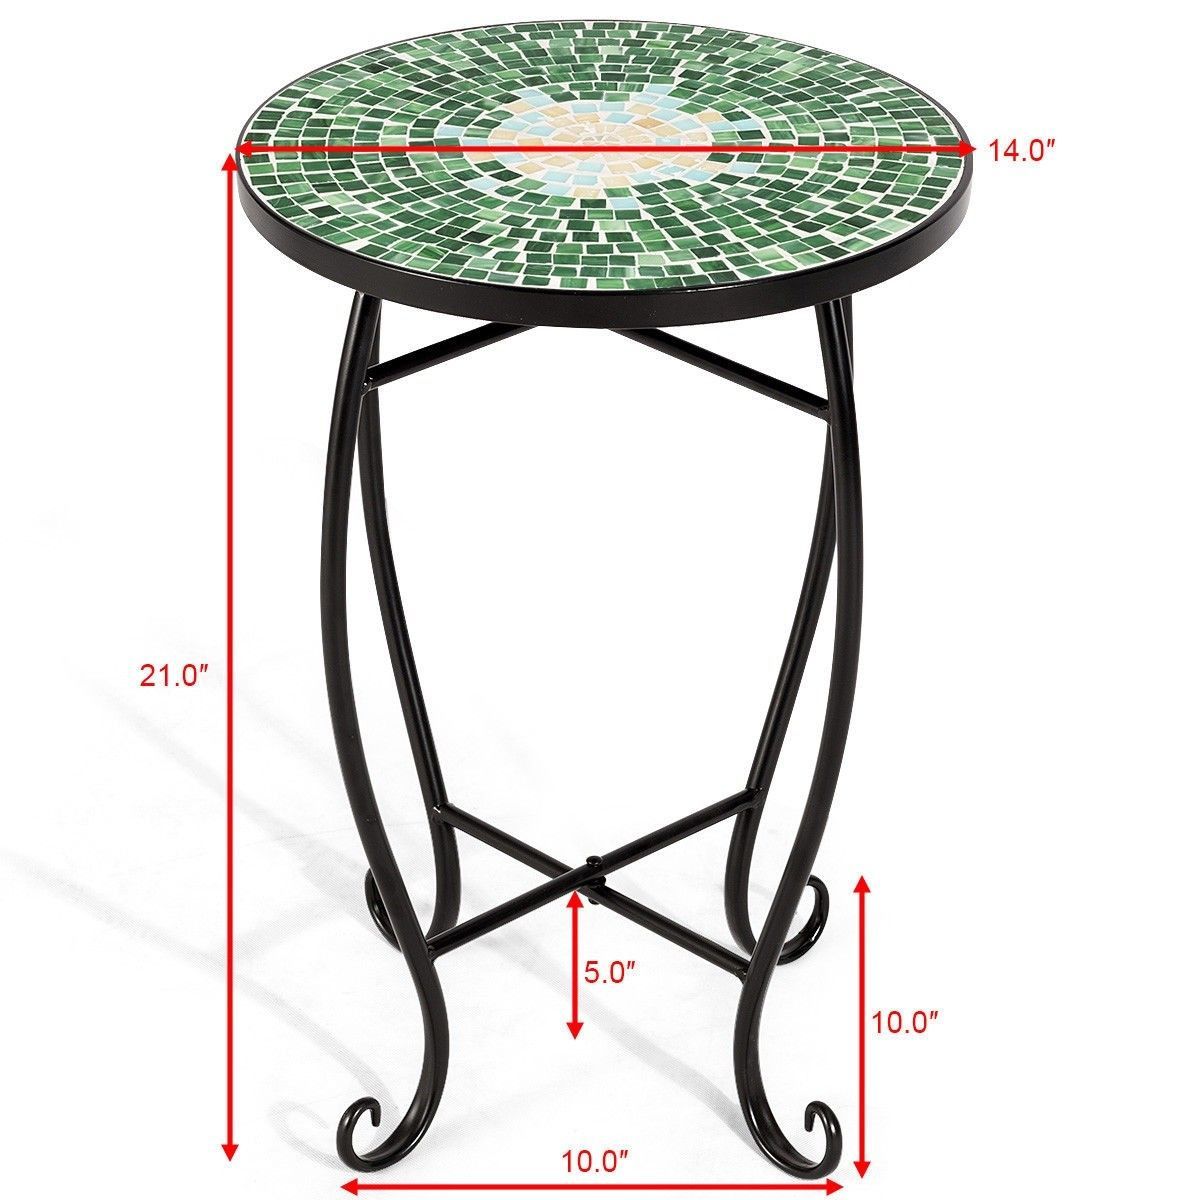 Outdoor Indoor Steel Accent Plant Stand Cobalt Table | Outdoor Accent Throughout Ocean Mosaic Outdoor Accent Tables (View 8 of 15)